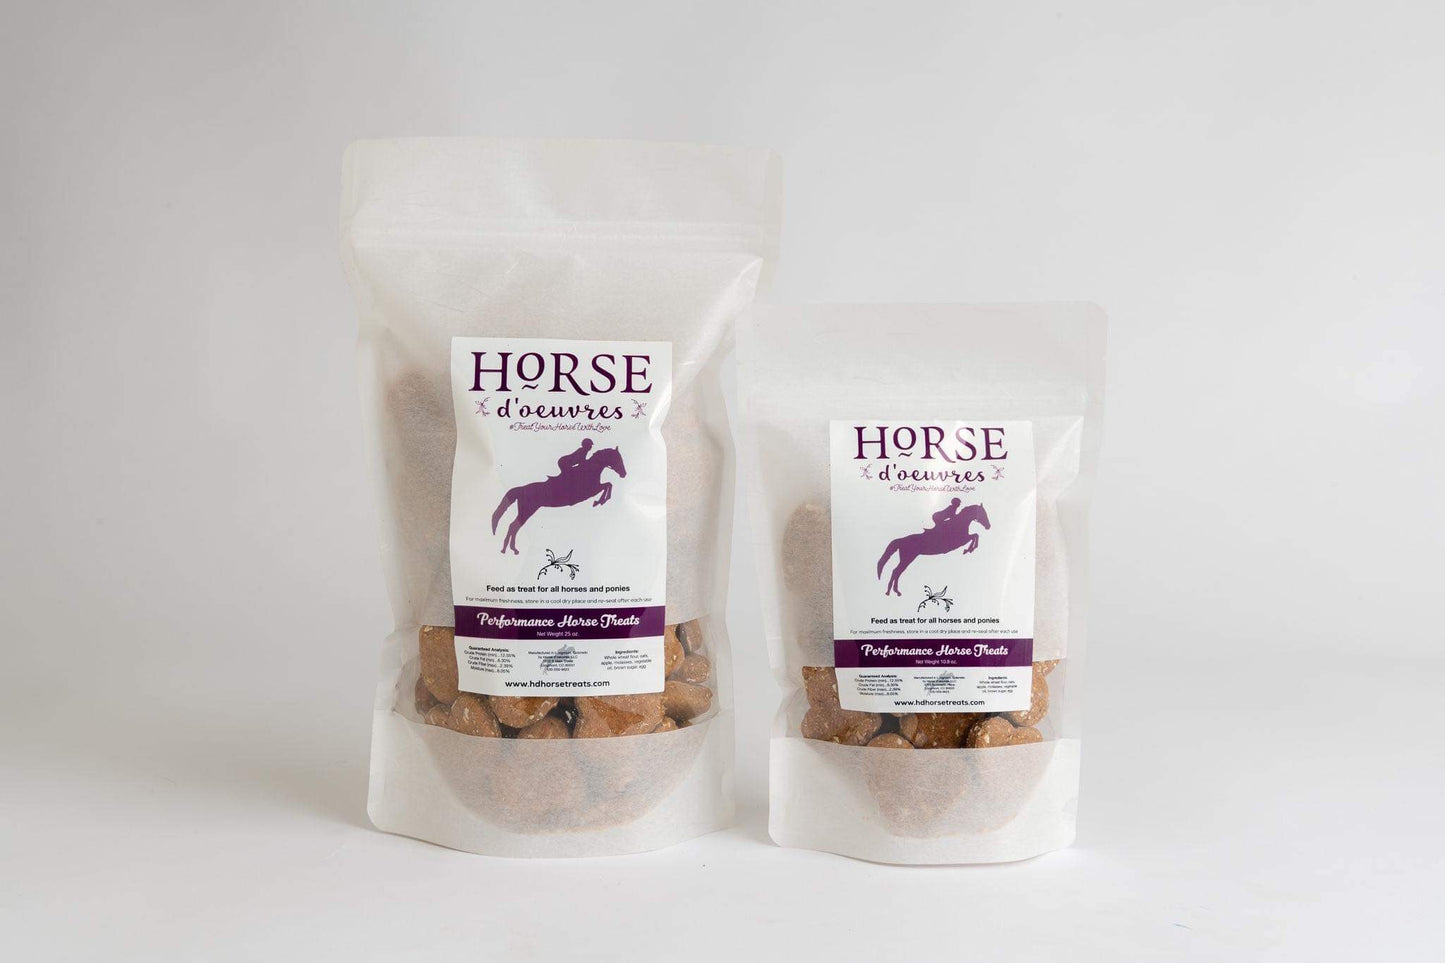 Horse d'oeuvres All Natural Home Baked Horse Treats-Original